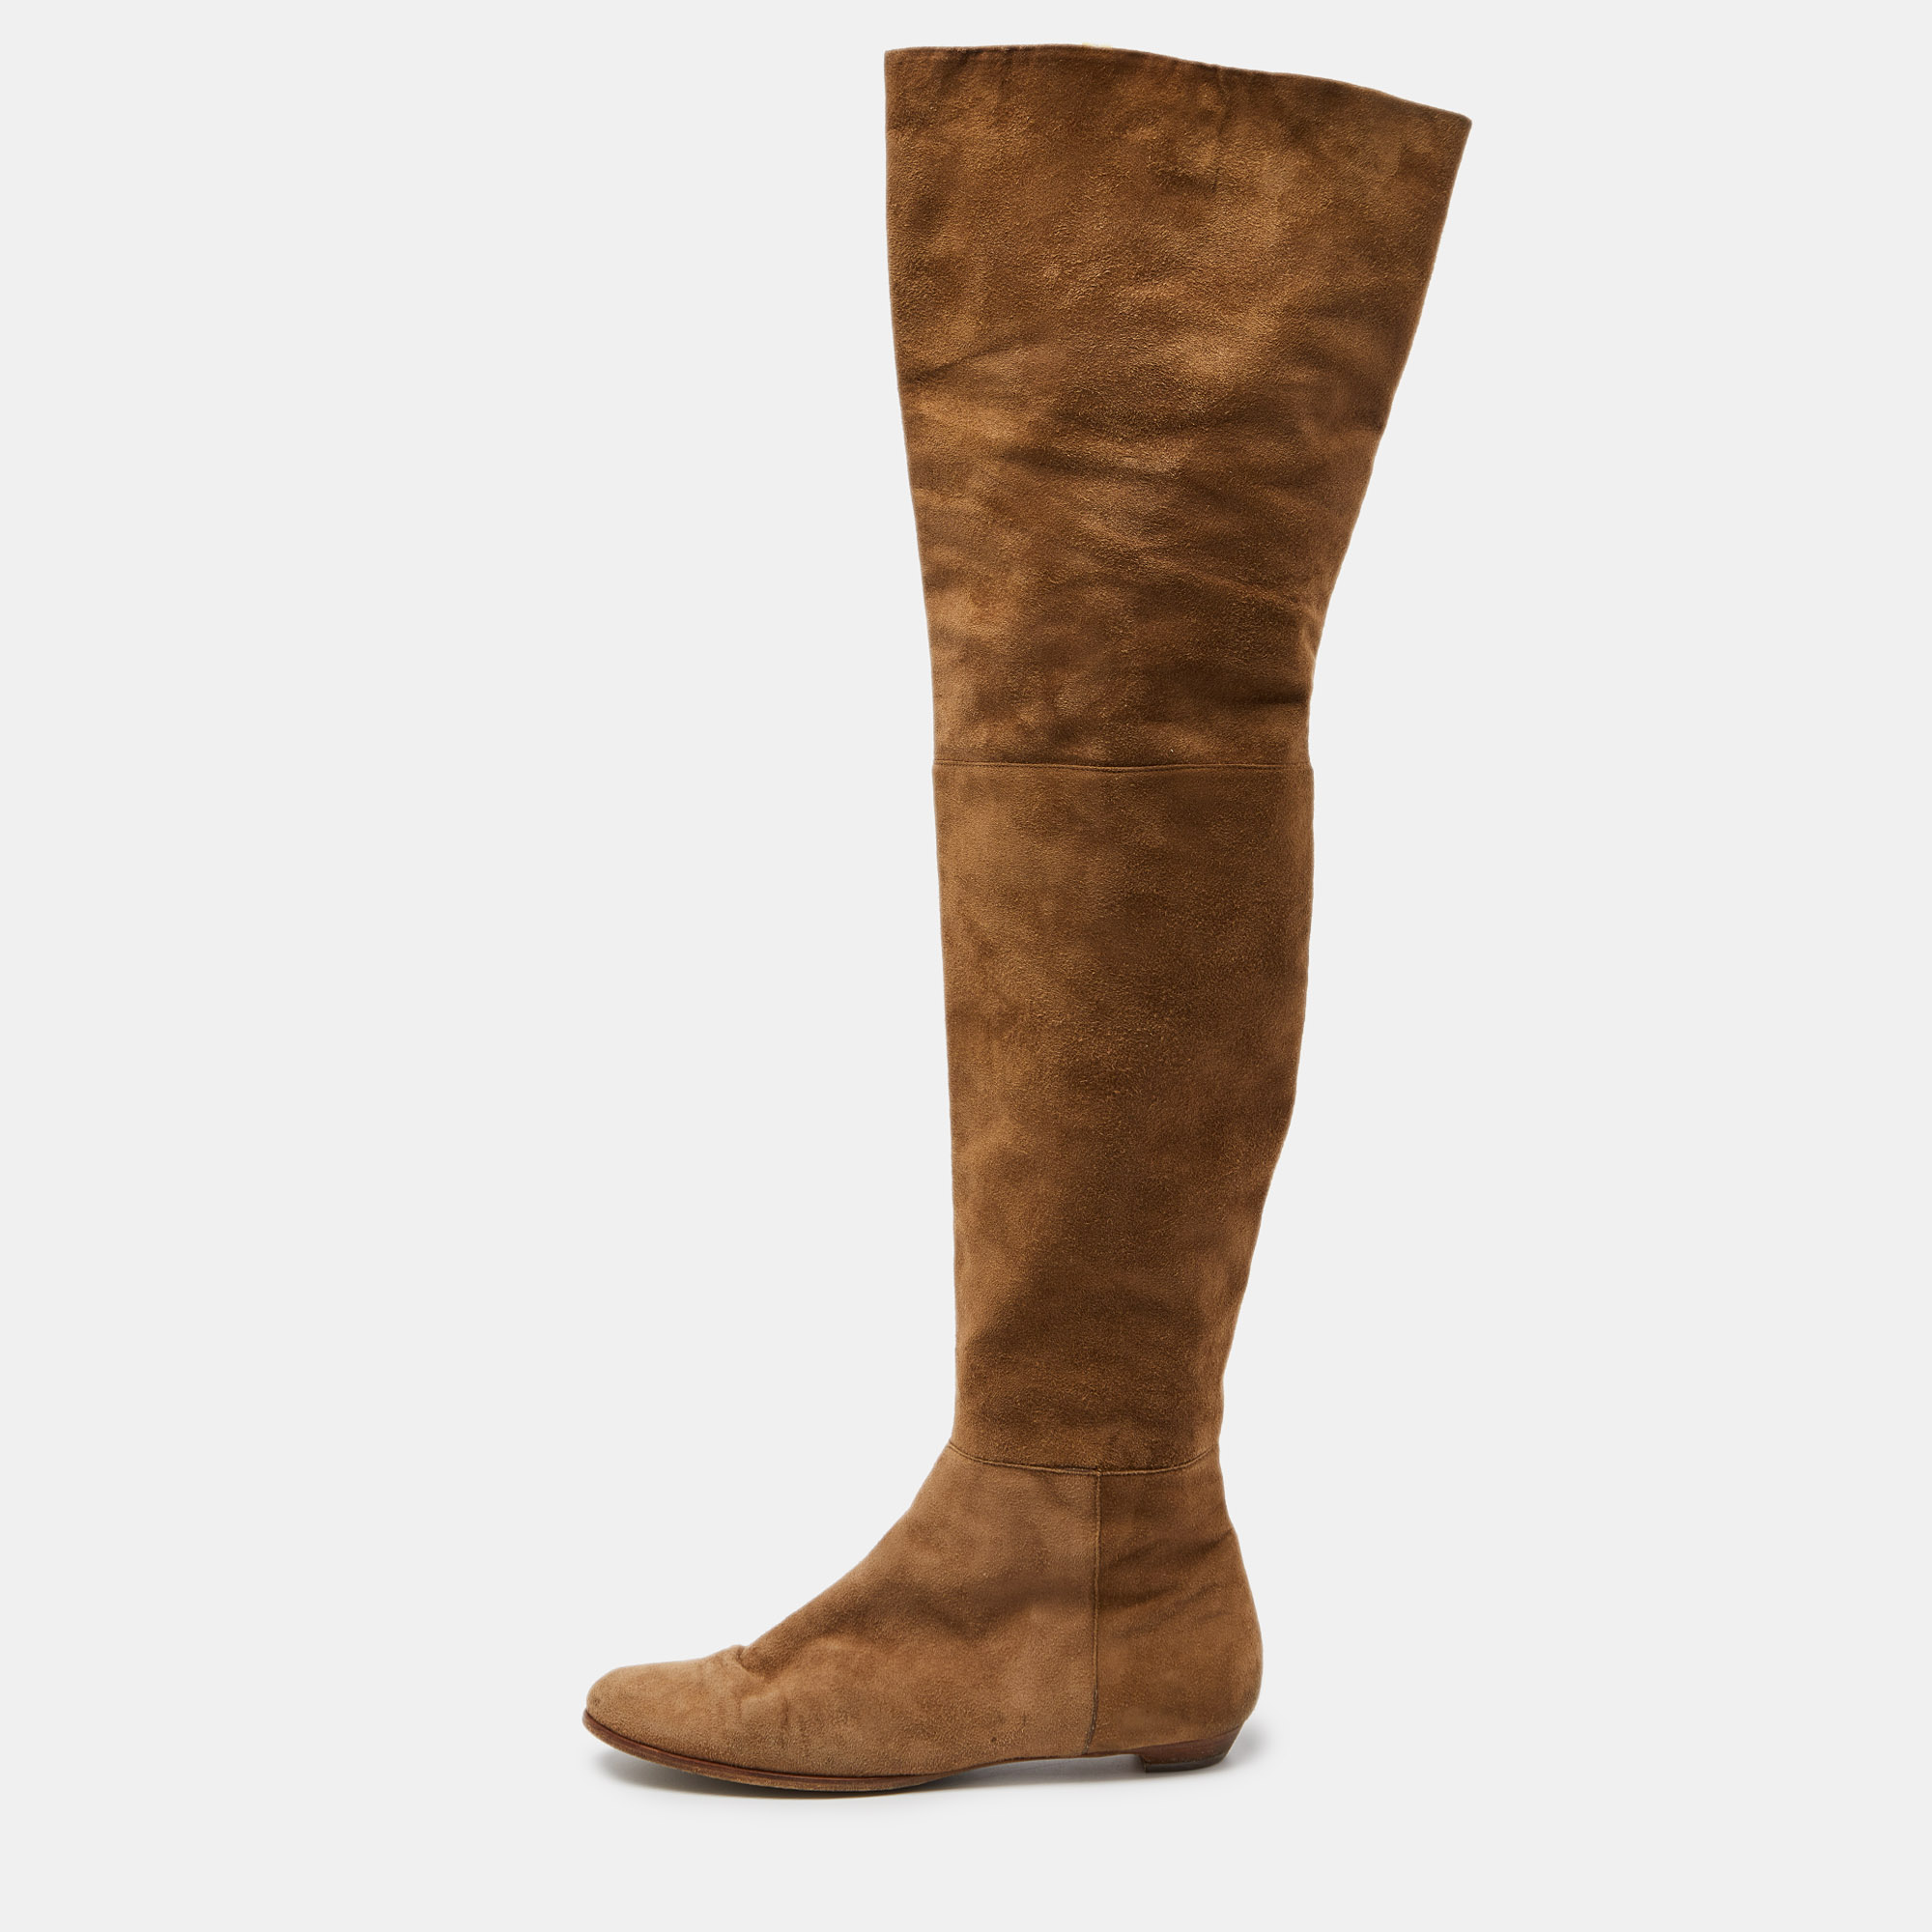 Jimmy Choo Brown Suede Over The Knee Length Boots Size 40